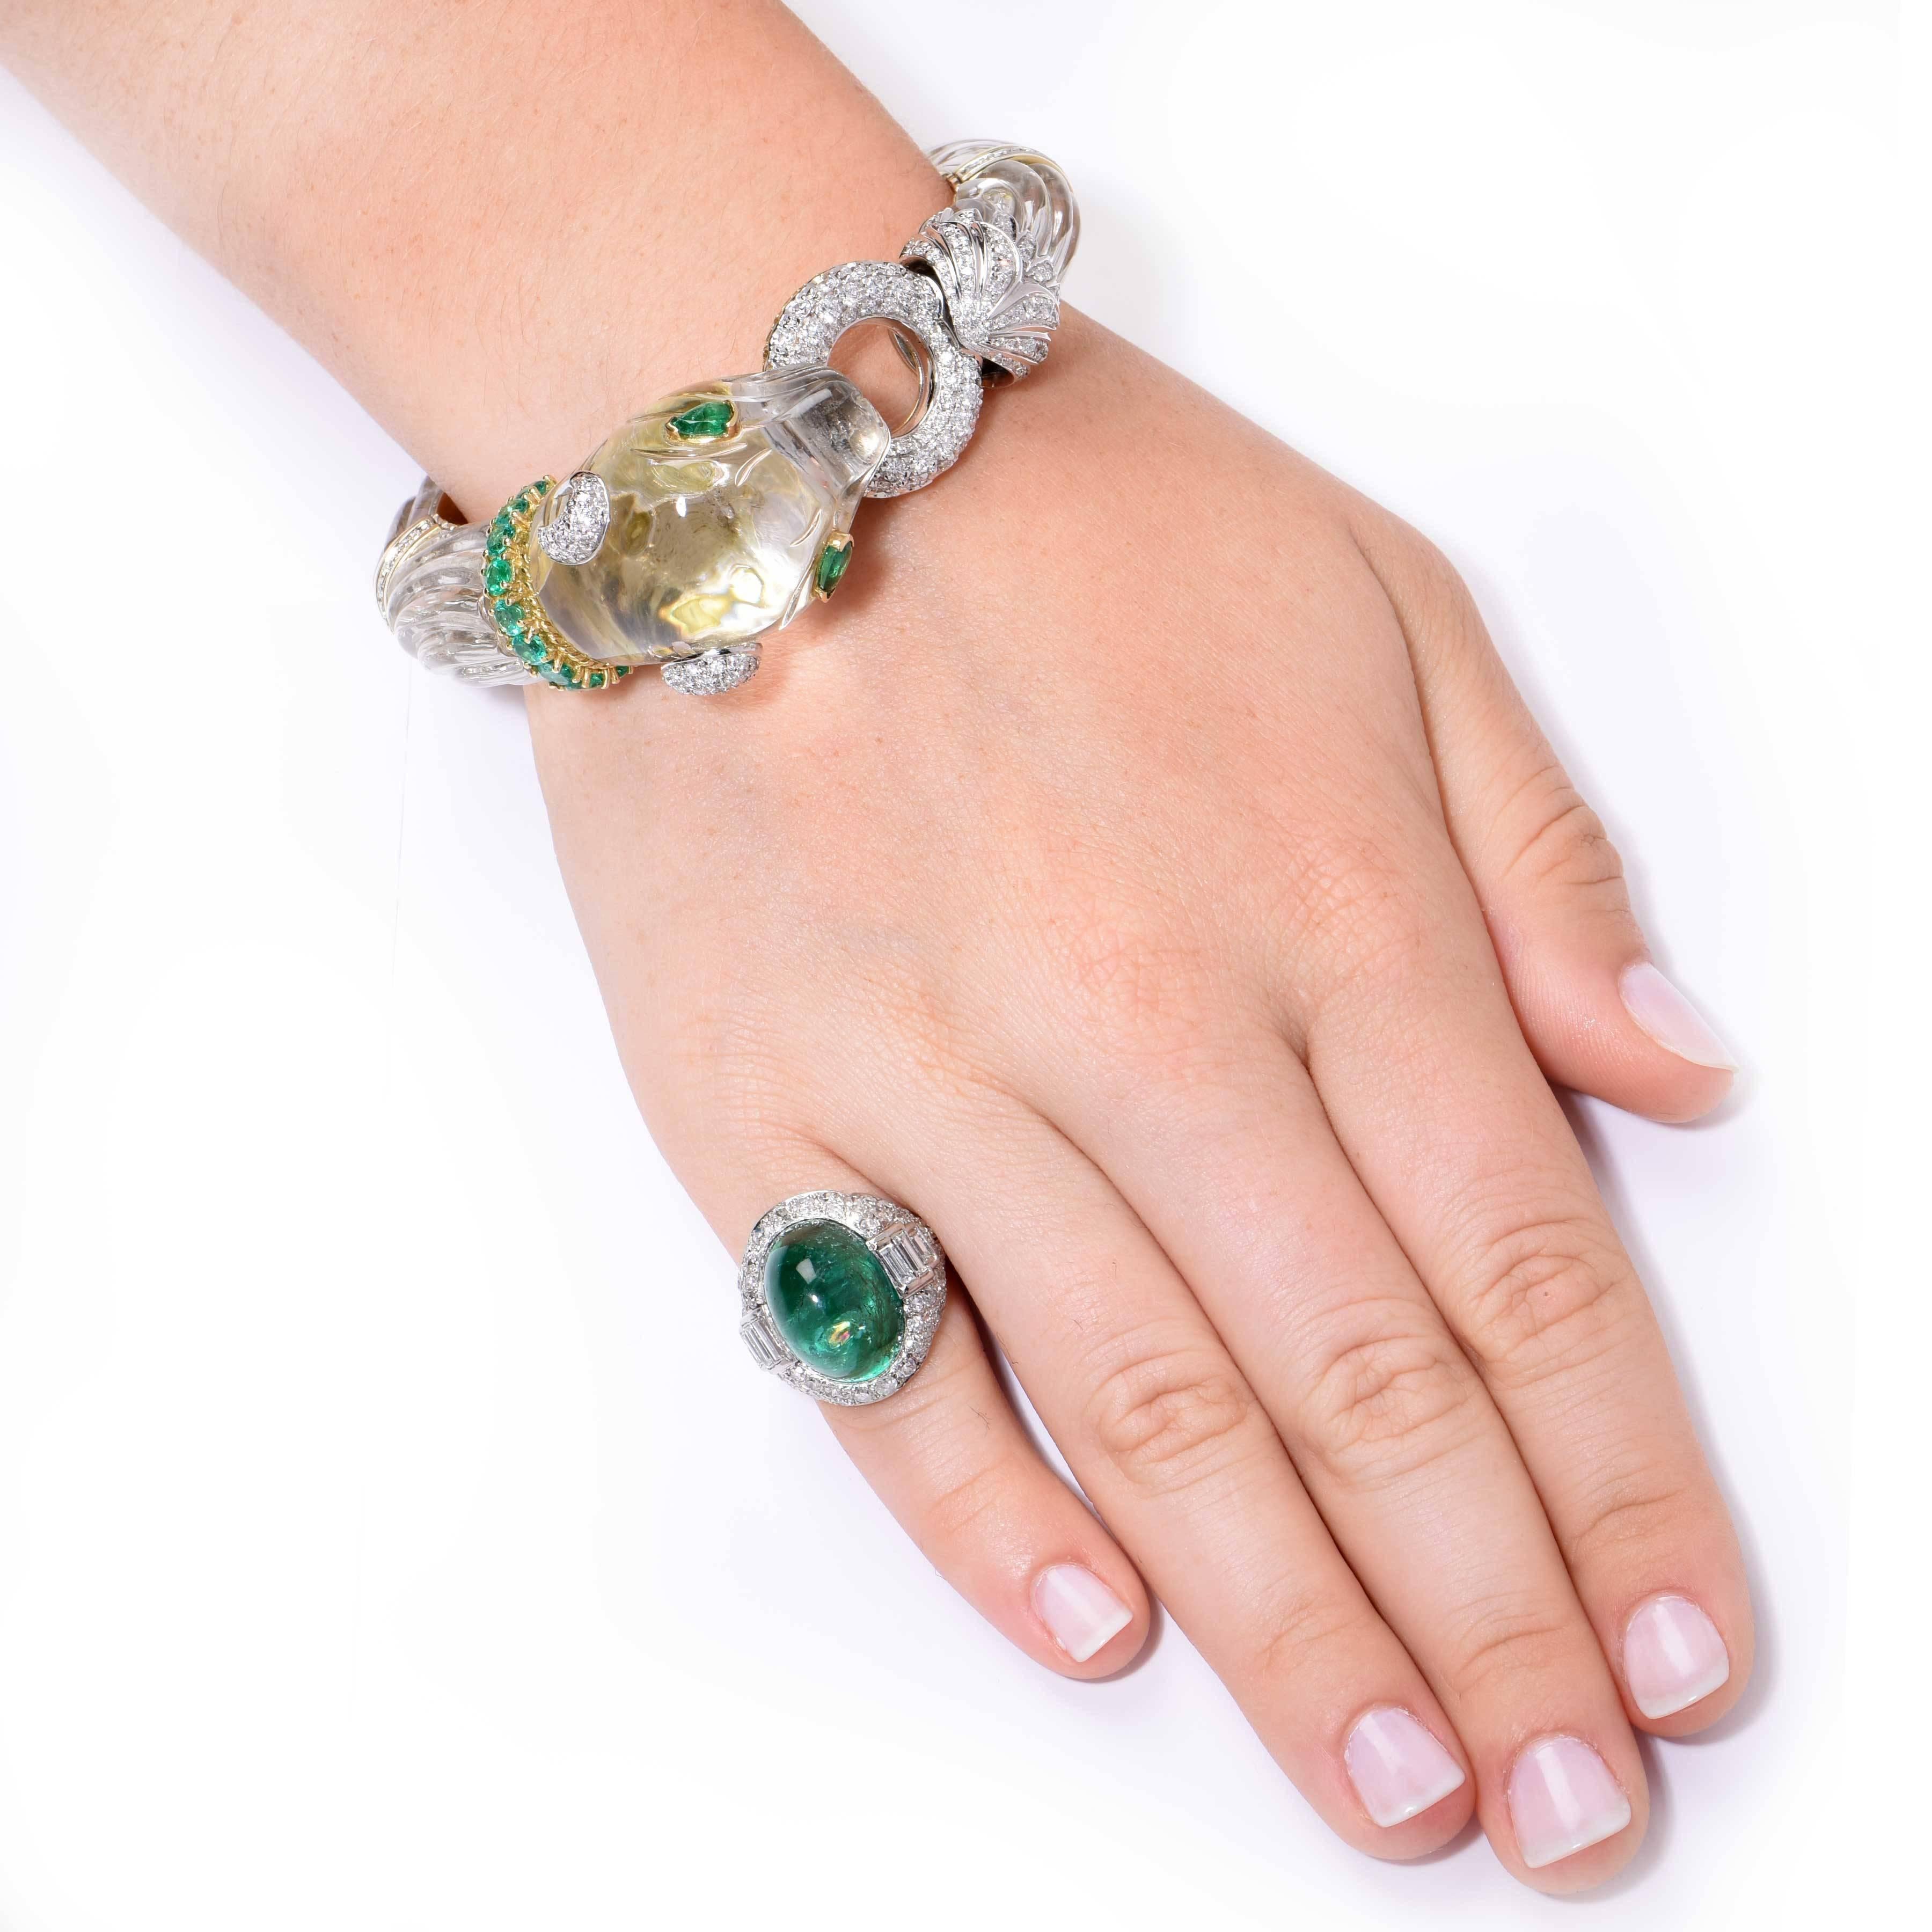 This stunning rock crystal, diamond and emerald panther bangle stamped Webb features collection quality diamonds and bright and colorful emeralds.